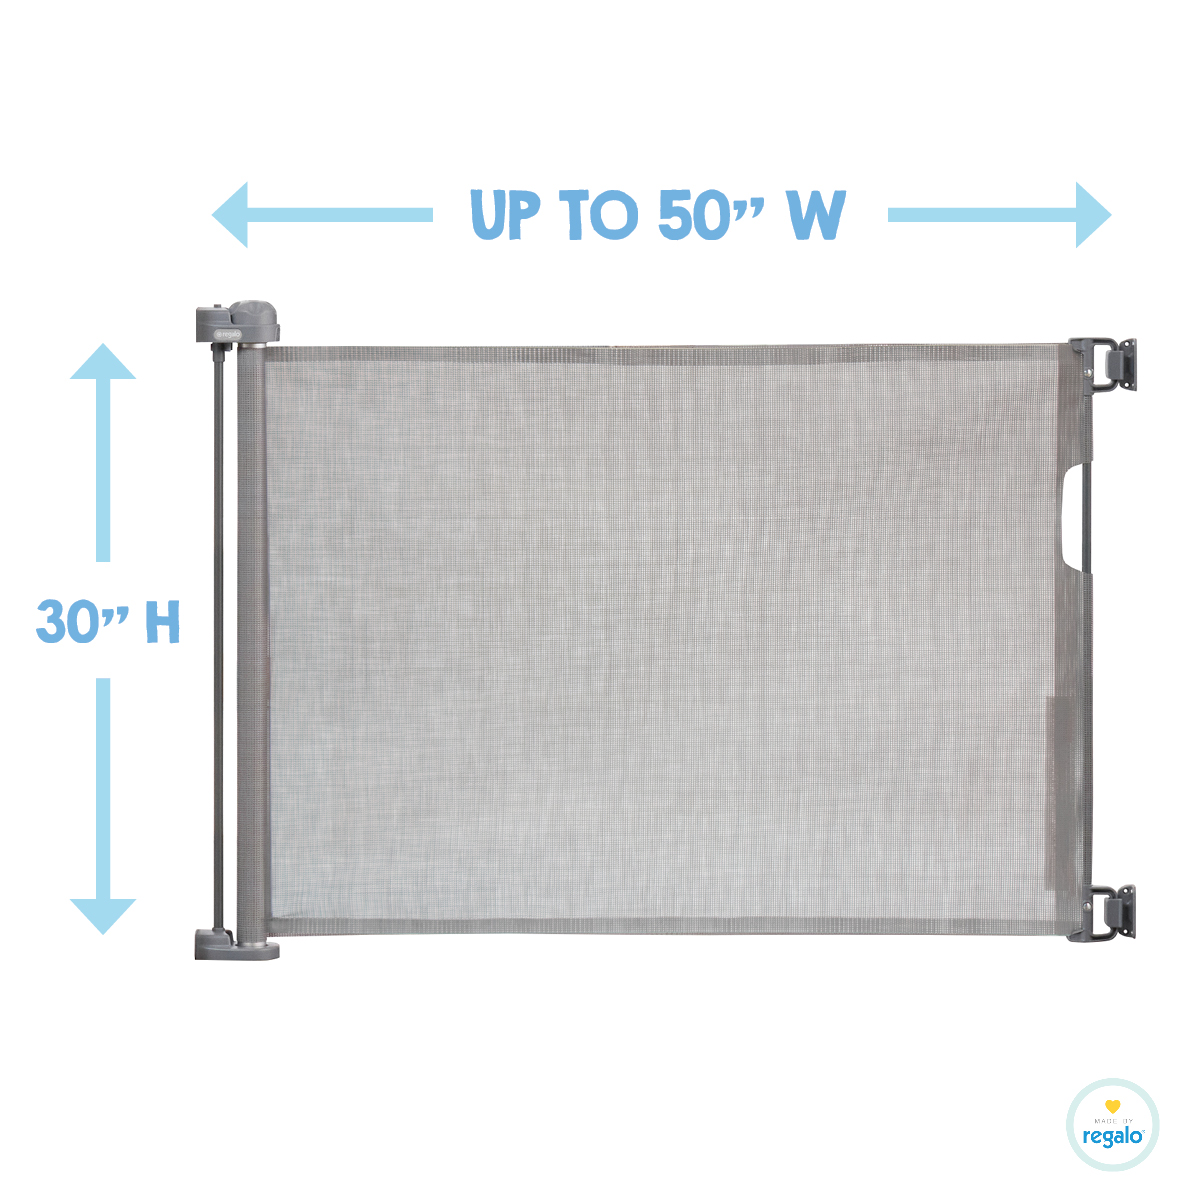 Regalo Retractable Baby Gate, Expands up to 50" Wide, Includes Wall Mounts - image 2 of 5